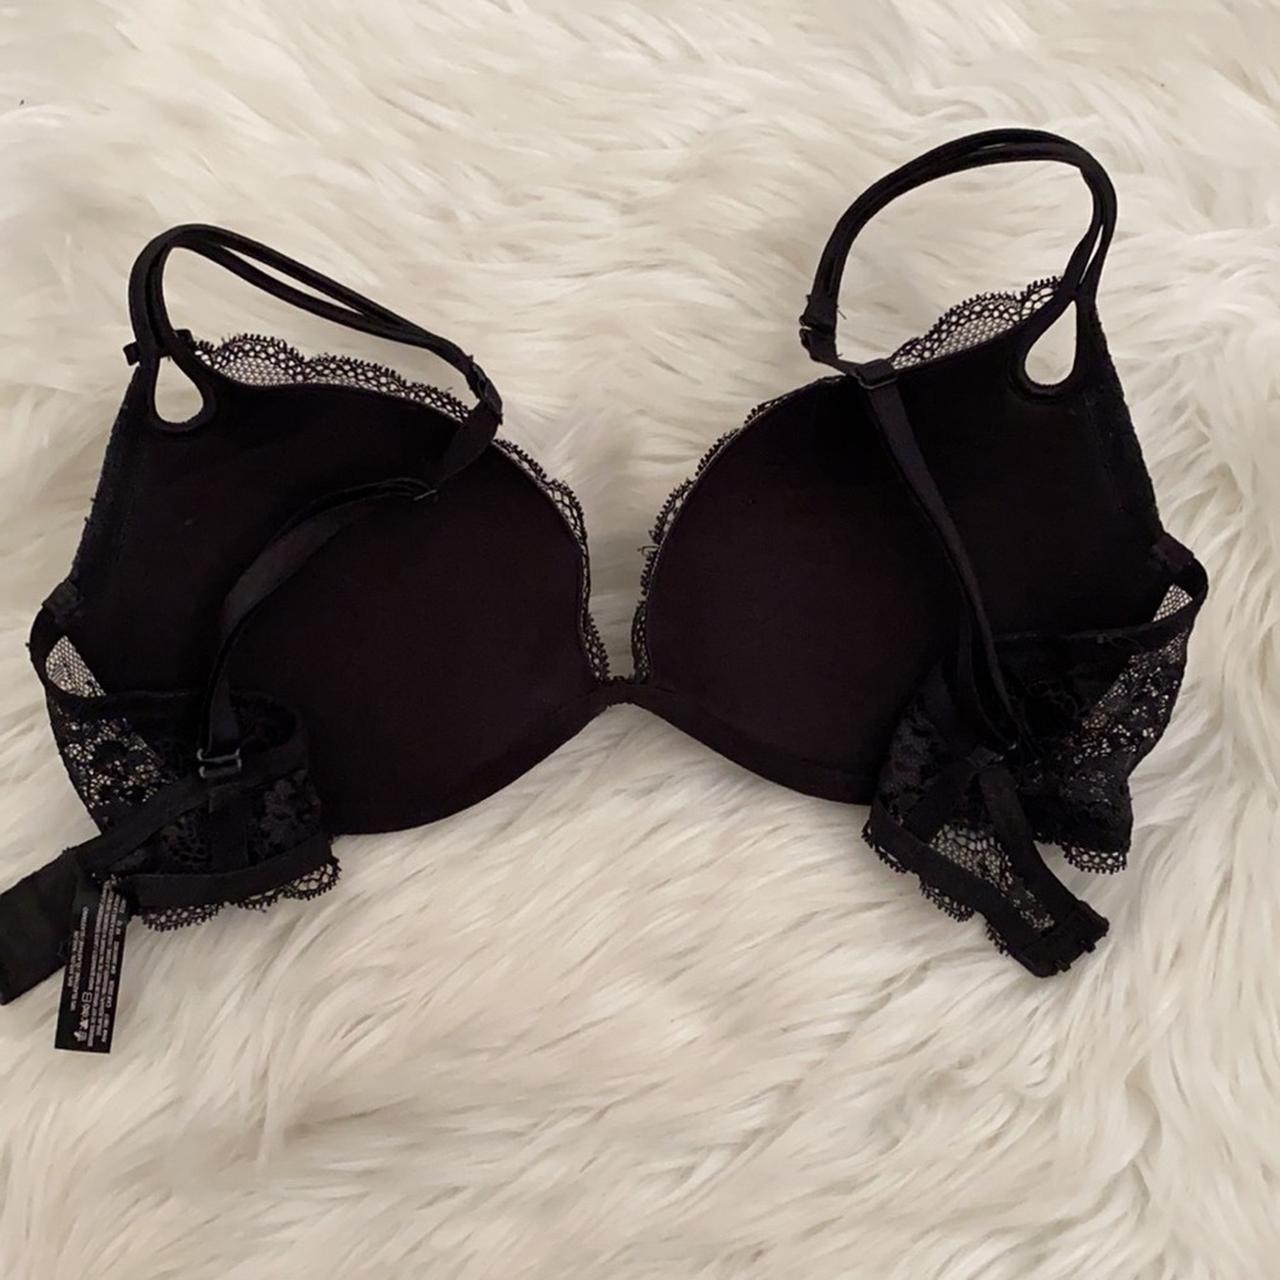 BLACK CORSET SEXY PUSH-UP BRA WIRED GOING OUT - Depop